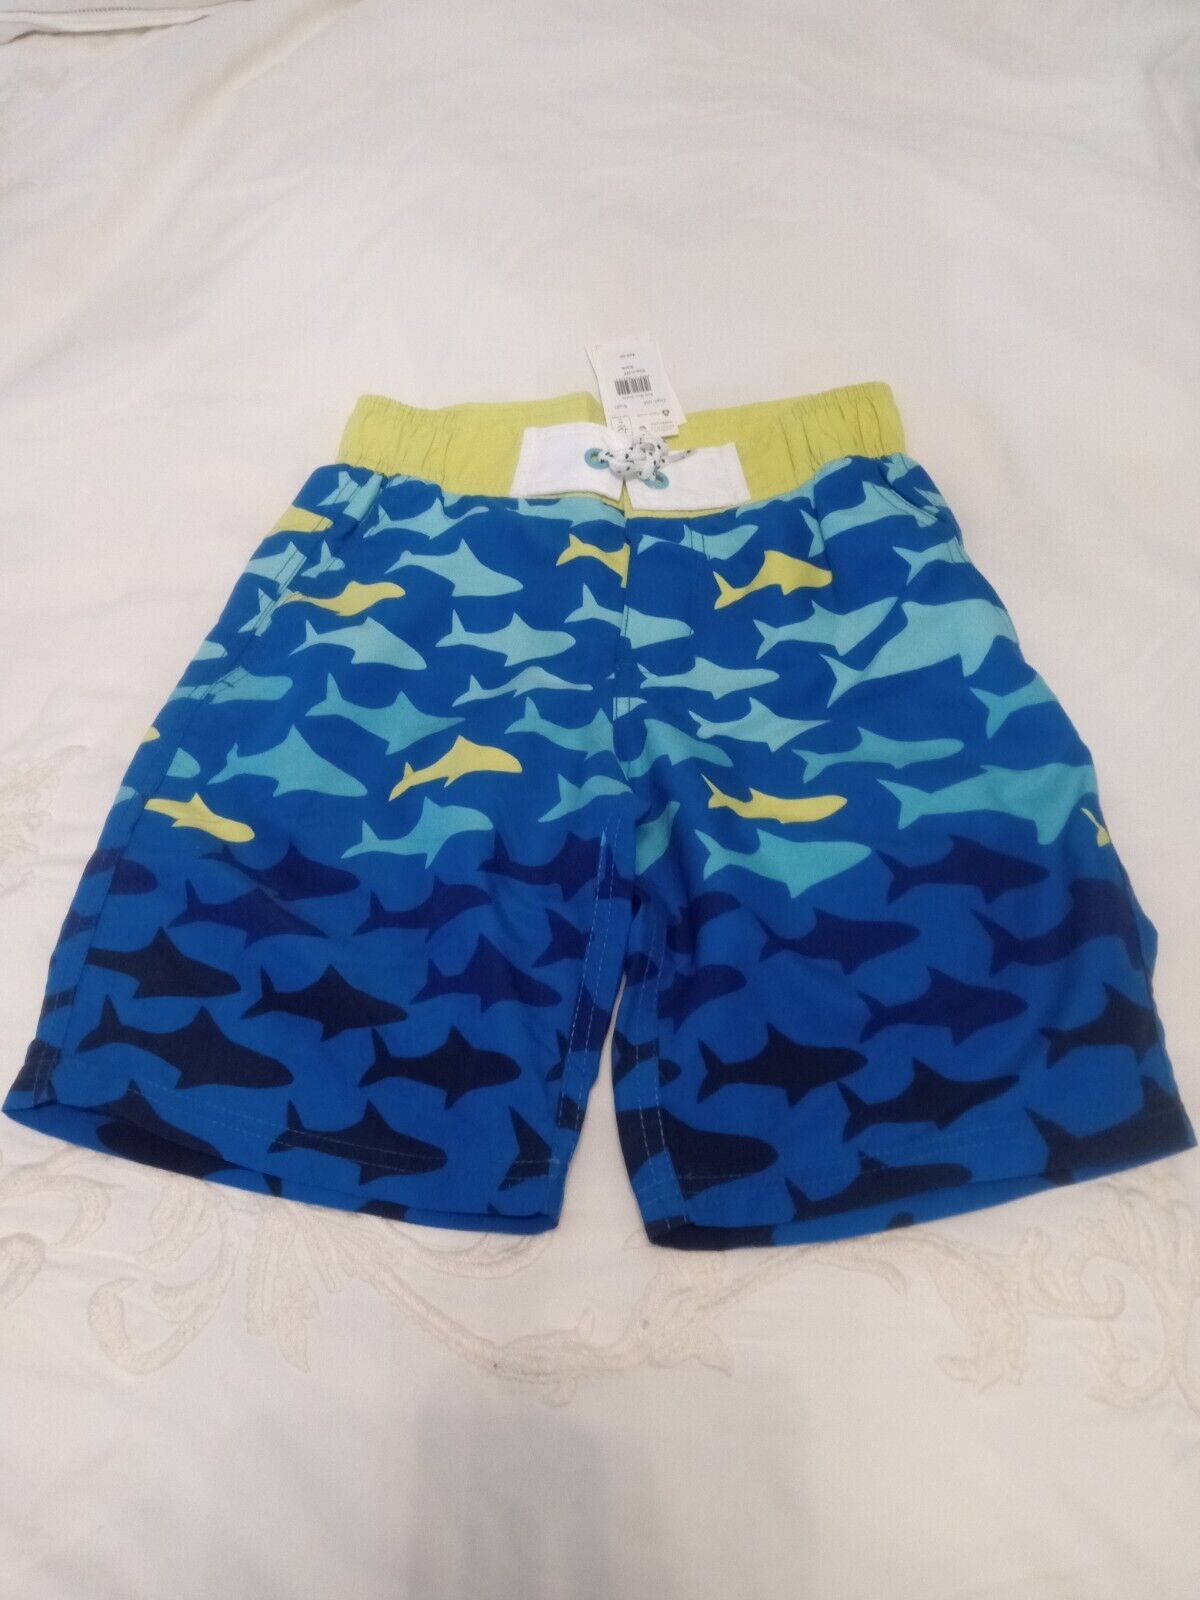 Boden boys new with tags swim board shorts size 11/12 fish/shark theme